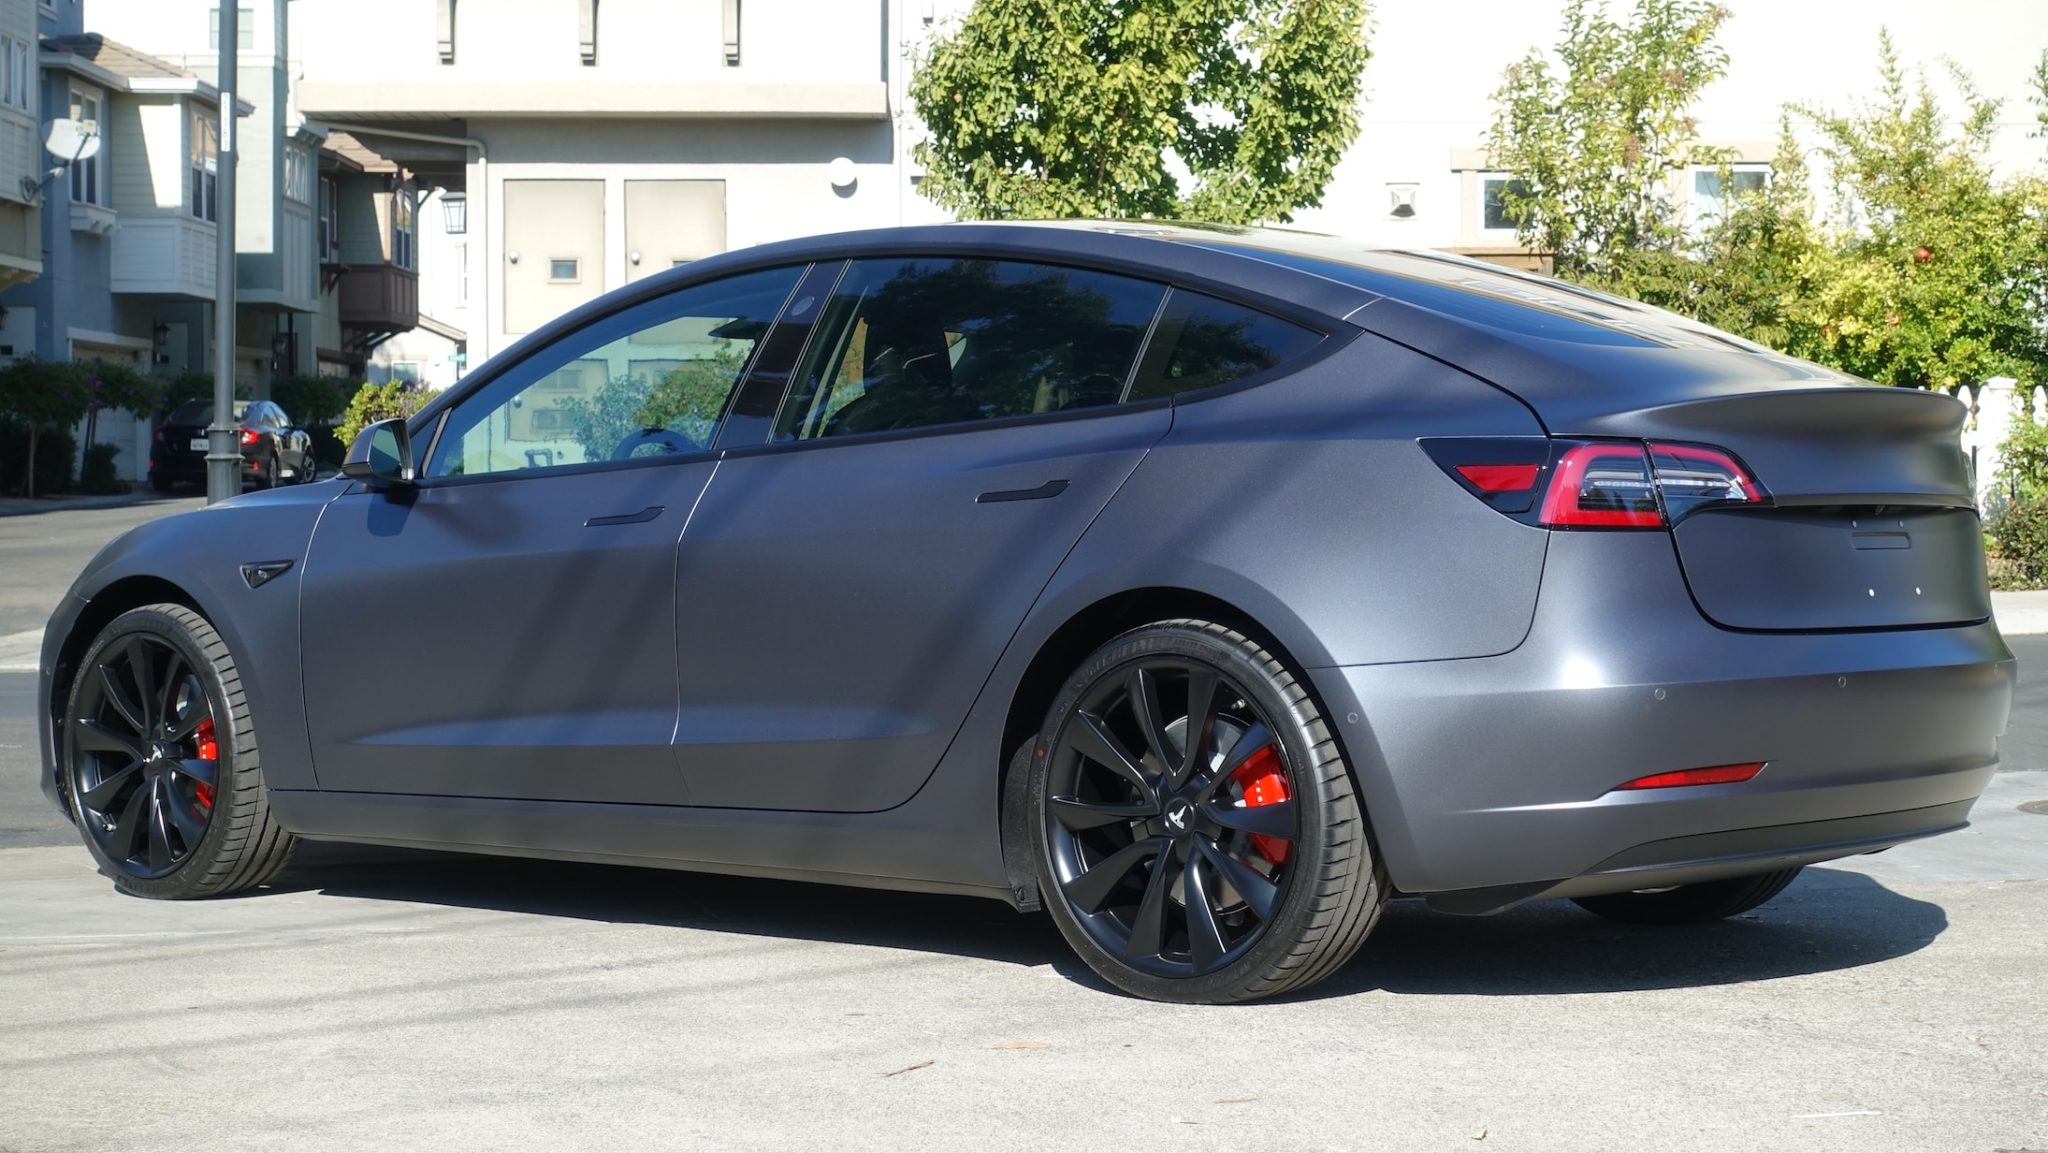 XPEL Stealth Tesla Model 3 All colors in matte paint protection